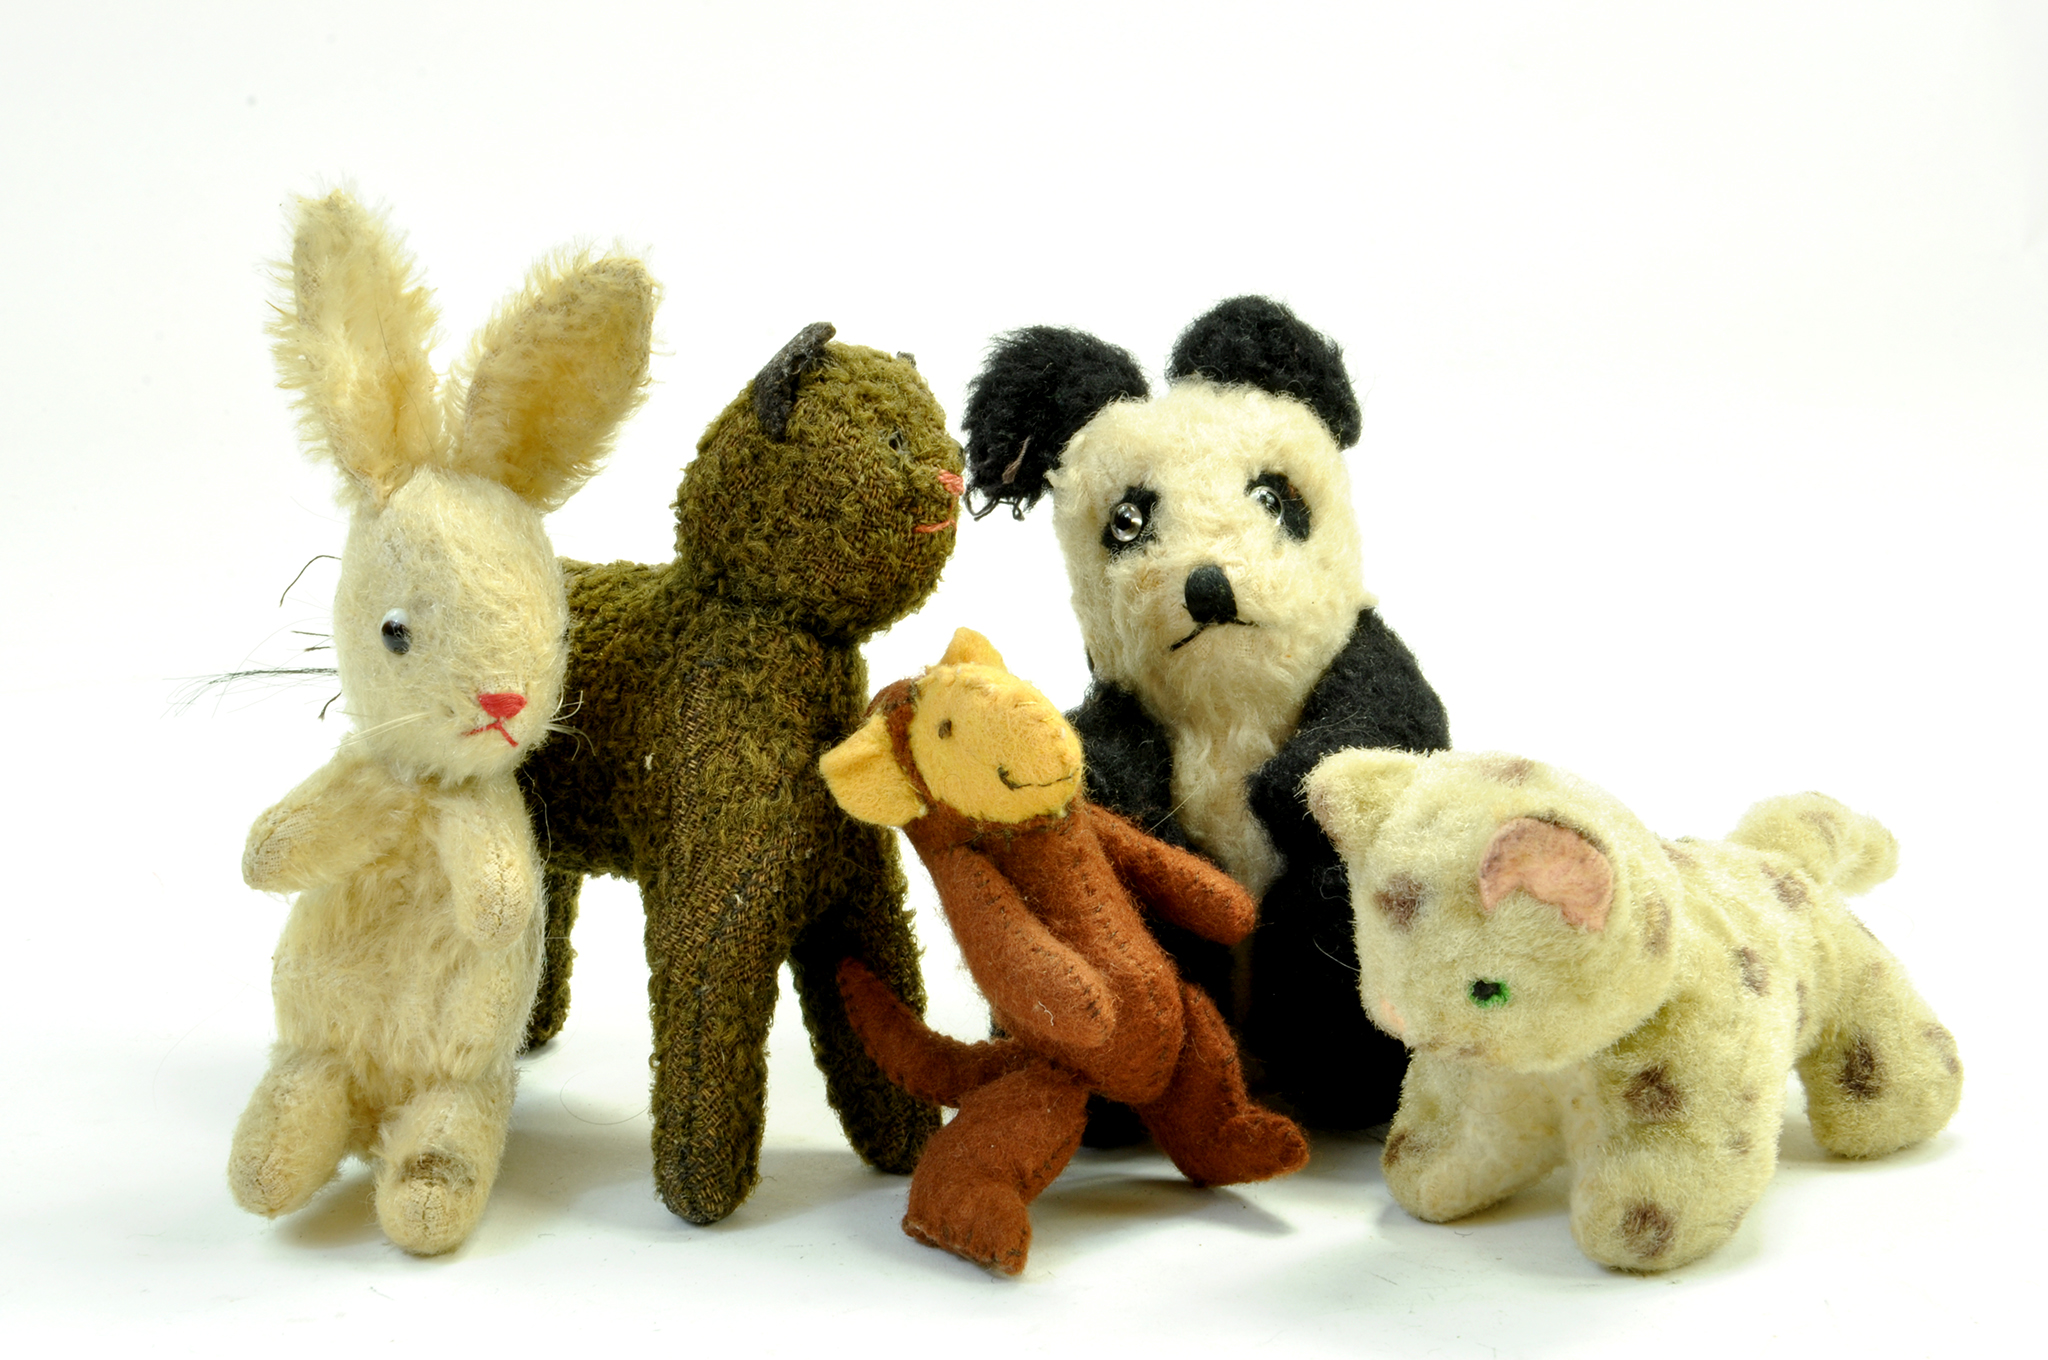 Vintage Issue Stuffed Animals comprising Begging Rabbit, Cat x 2, Panda and Monkey. Generally Fair